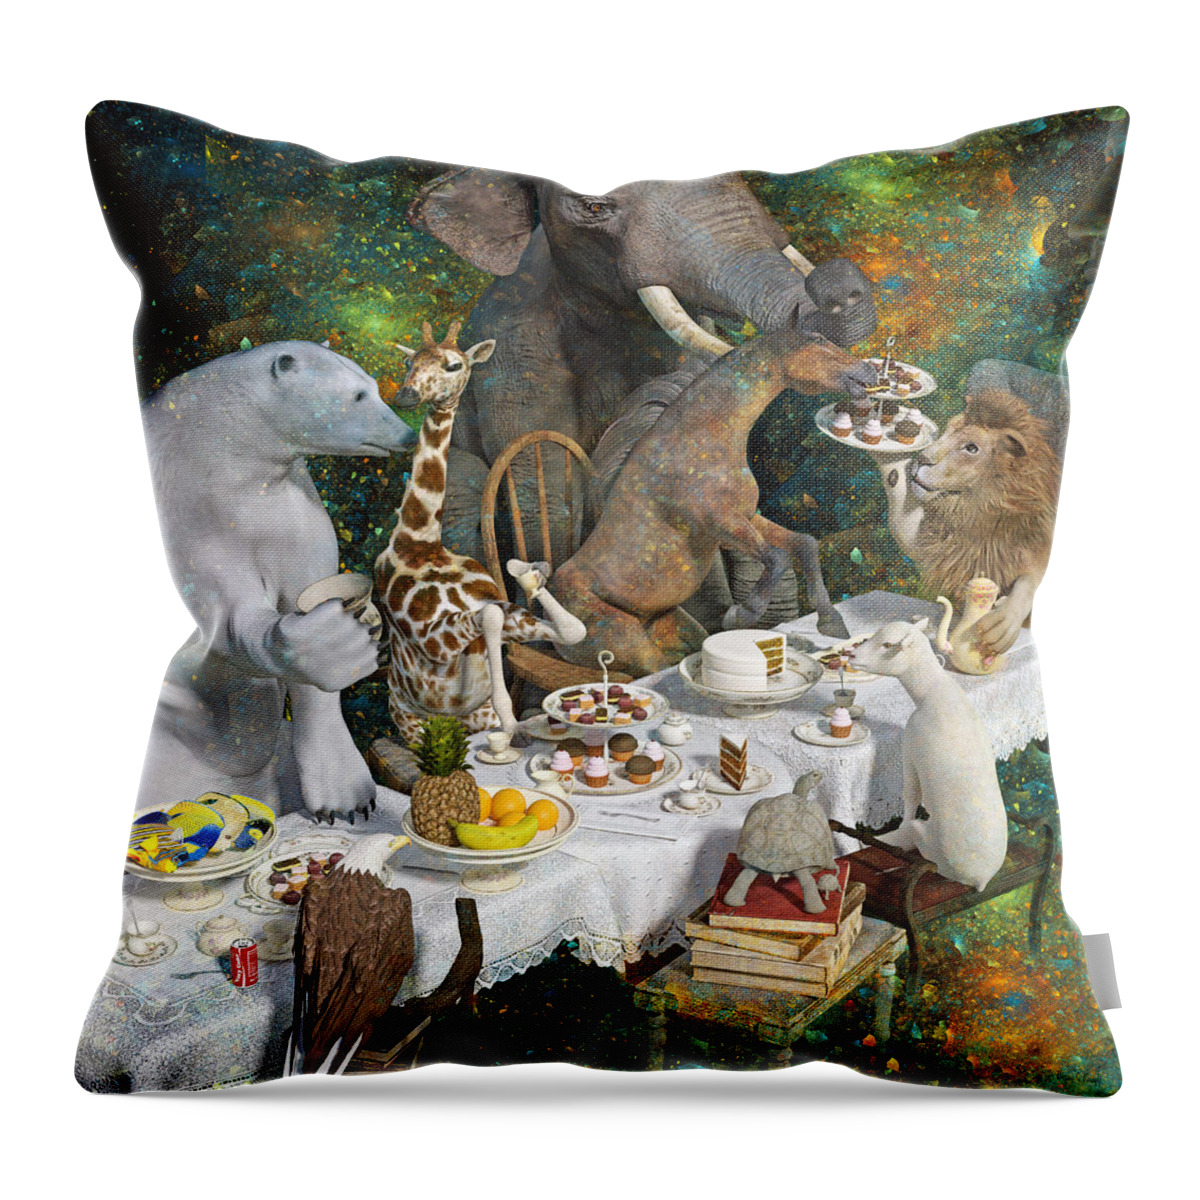 3d Throw Pillow featuring the digital art Zodiac Brainstorming by Betsy Knapp